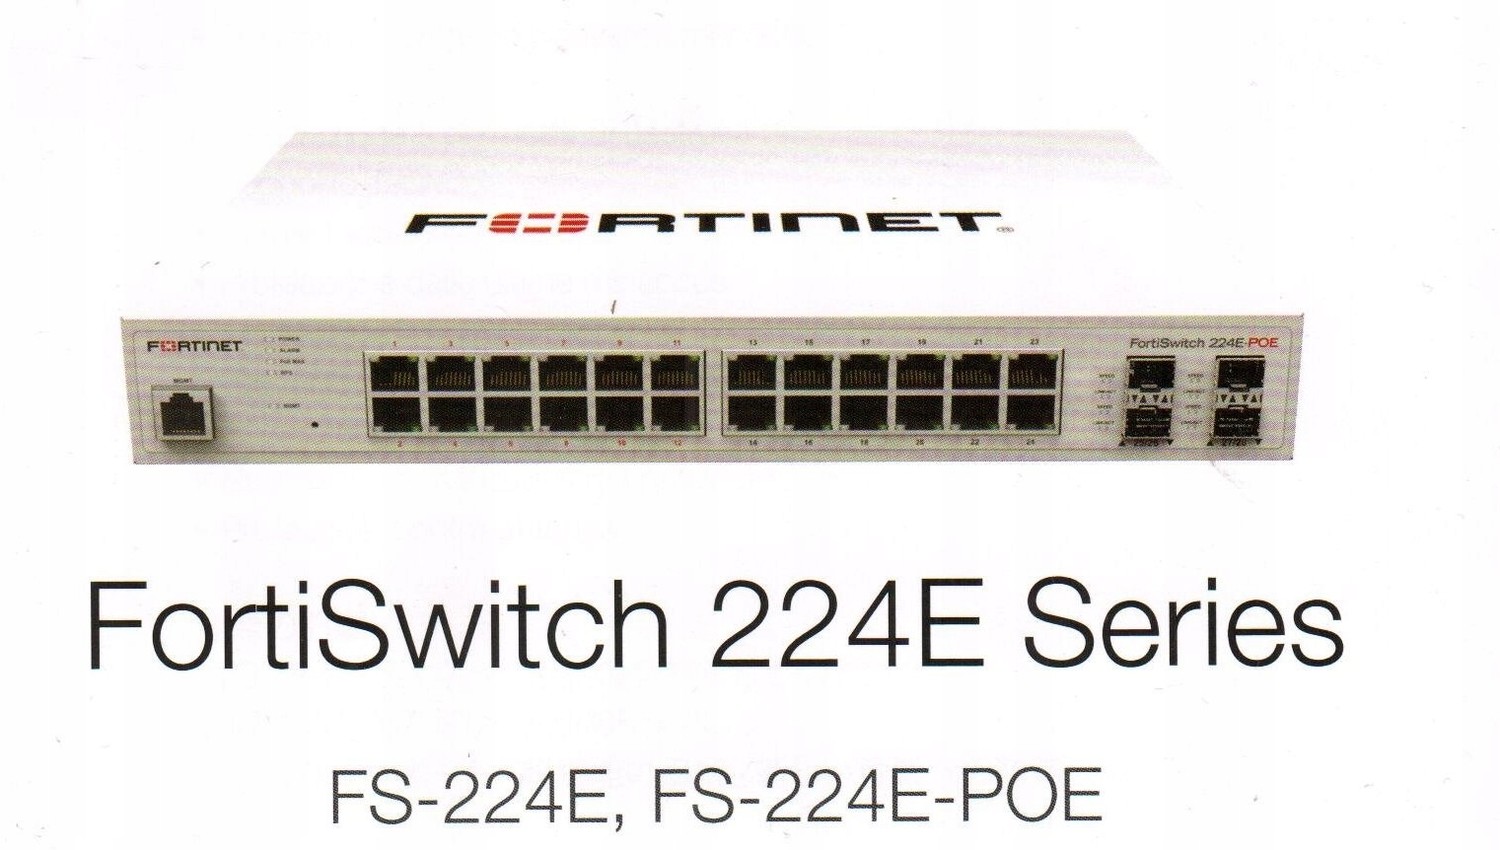 Fortinet Fortiswich 224E-POE